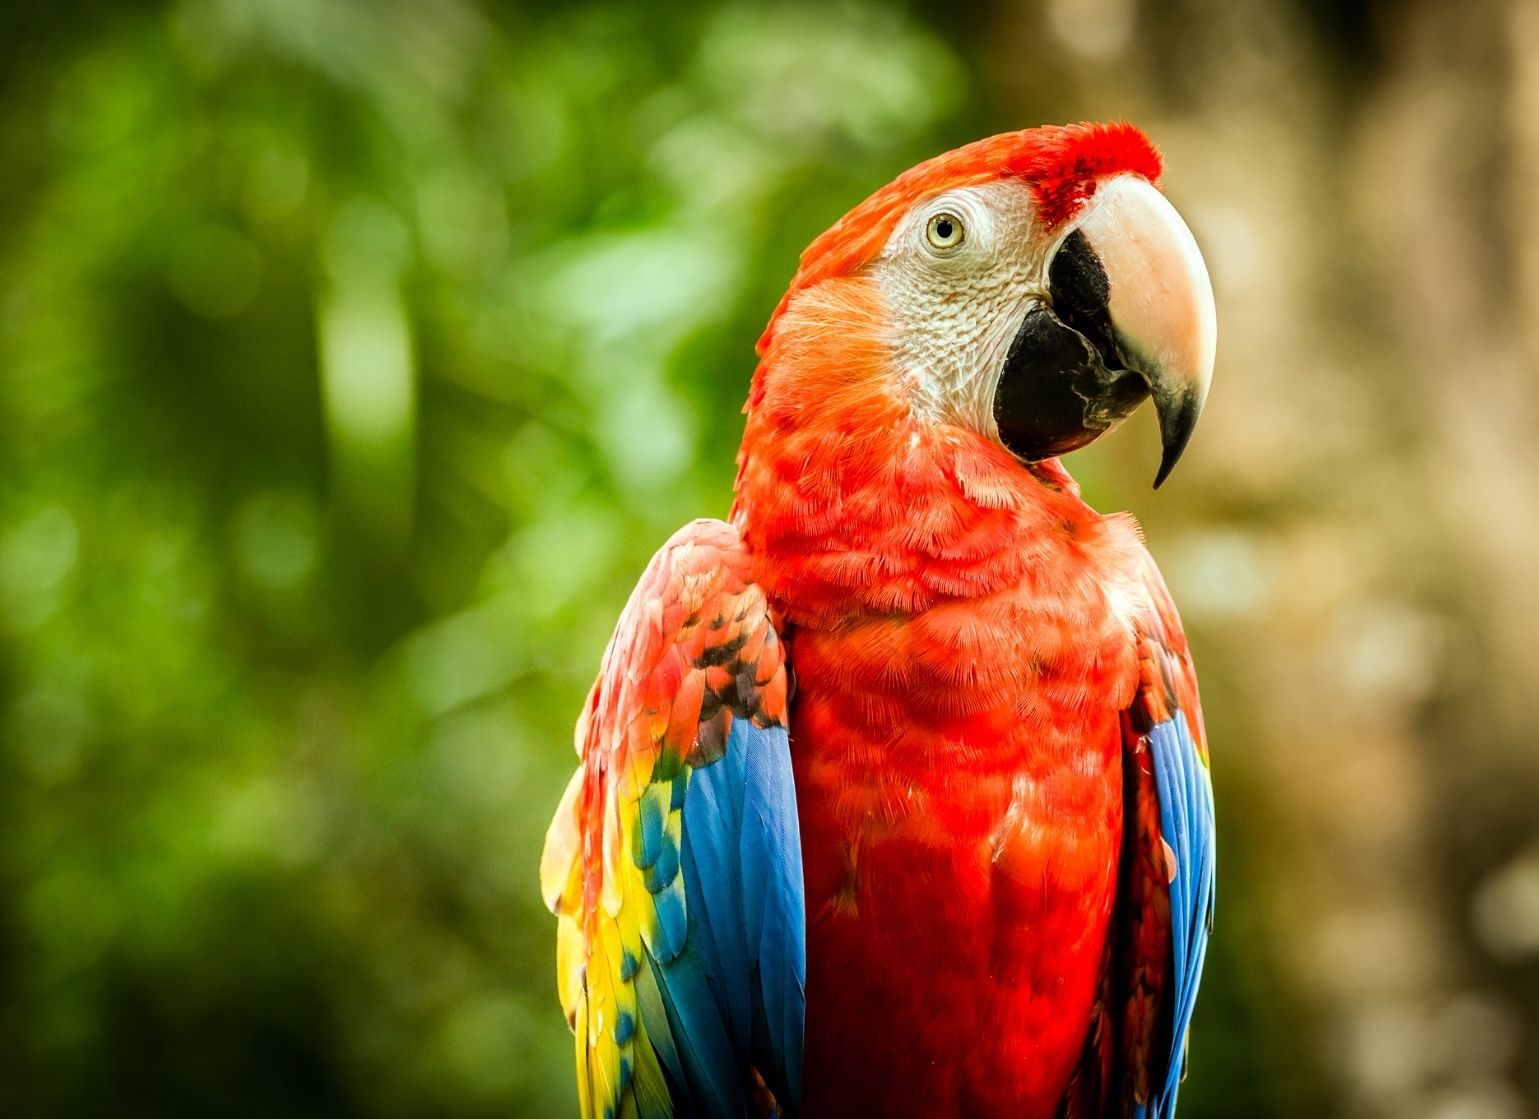 What is the price of baby Macaw parrot in India?